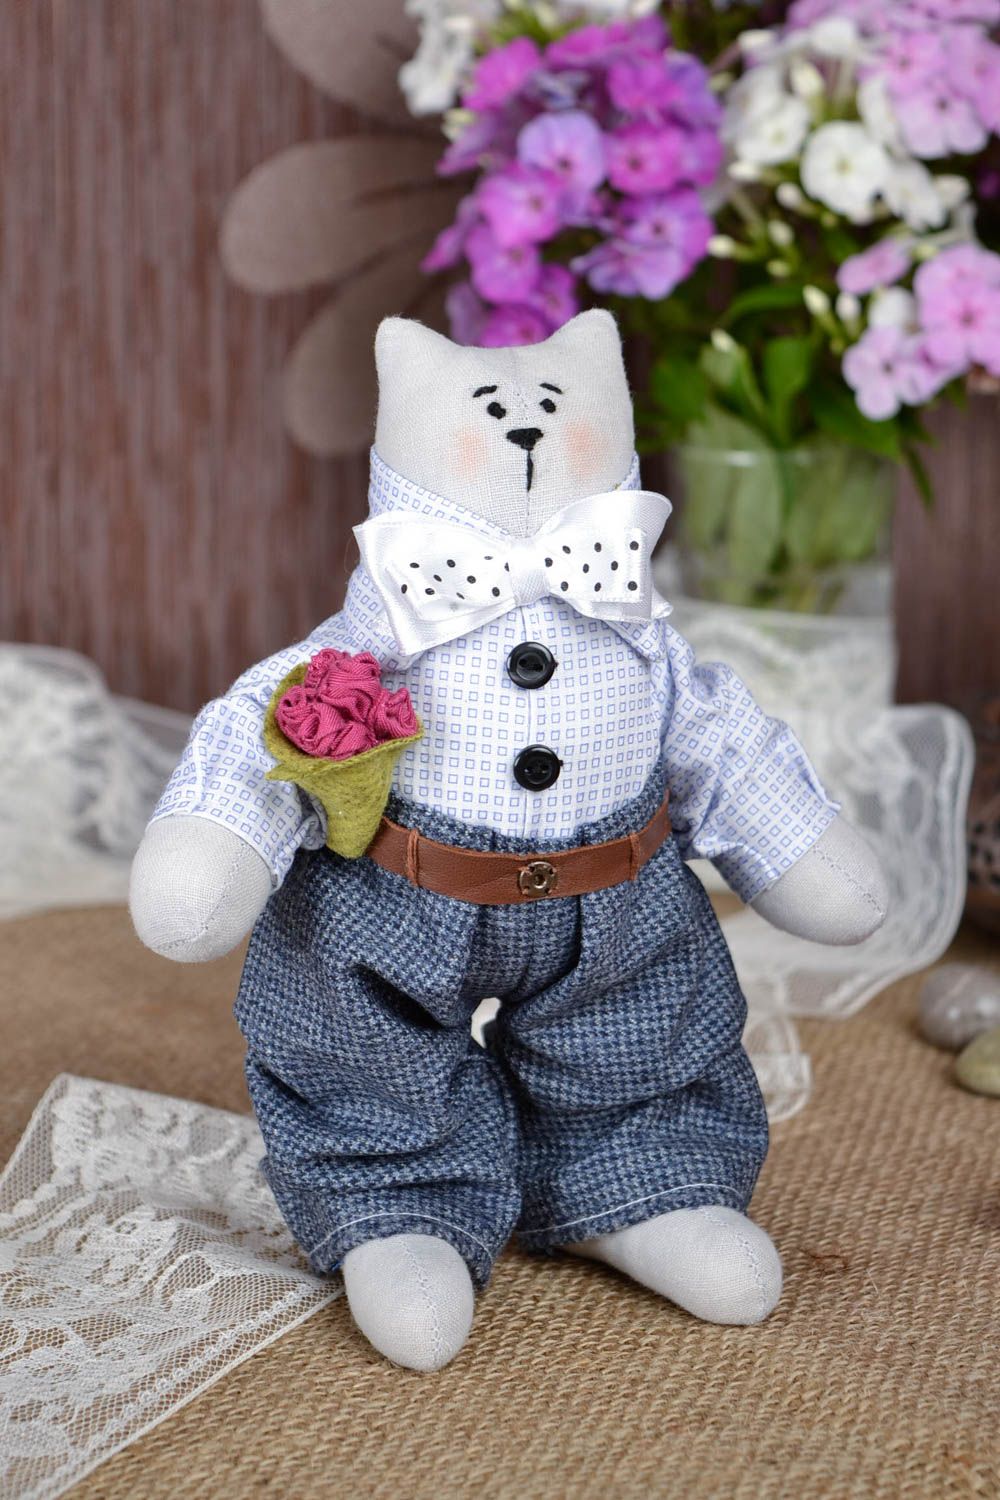 Soft toy stuffed animals handmade toys nursery decor unique gifts for kids photo 1